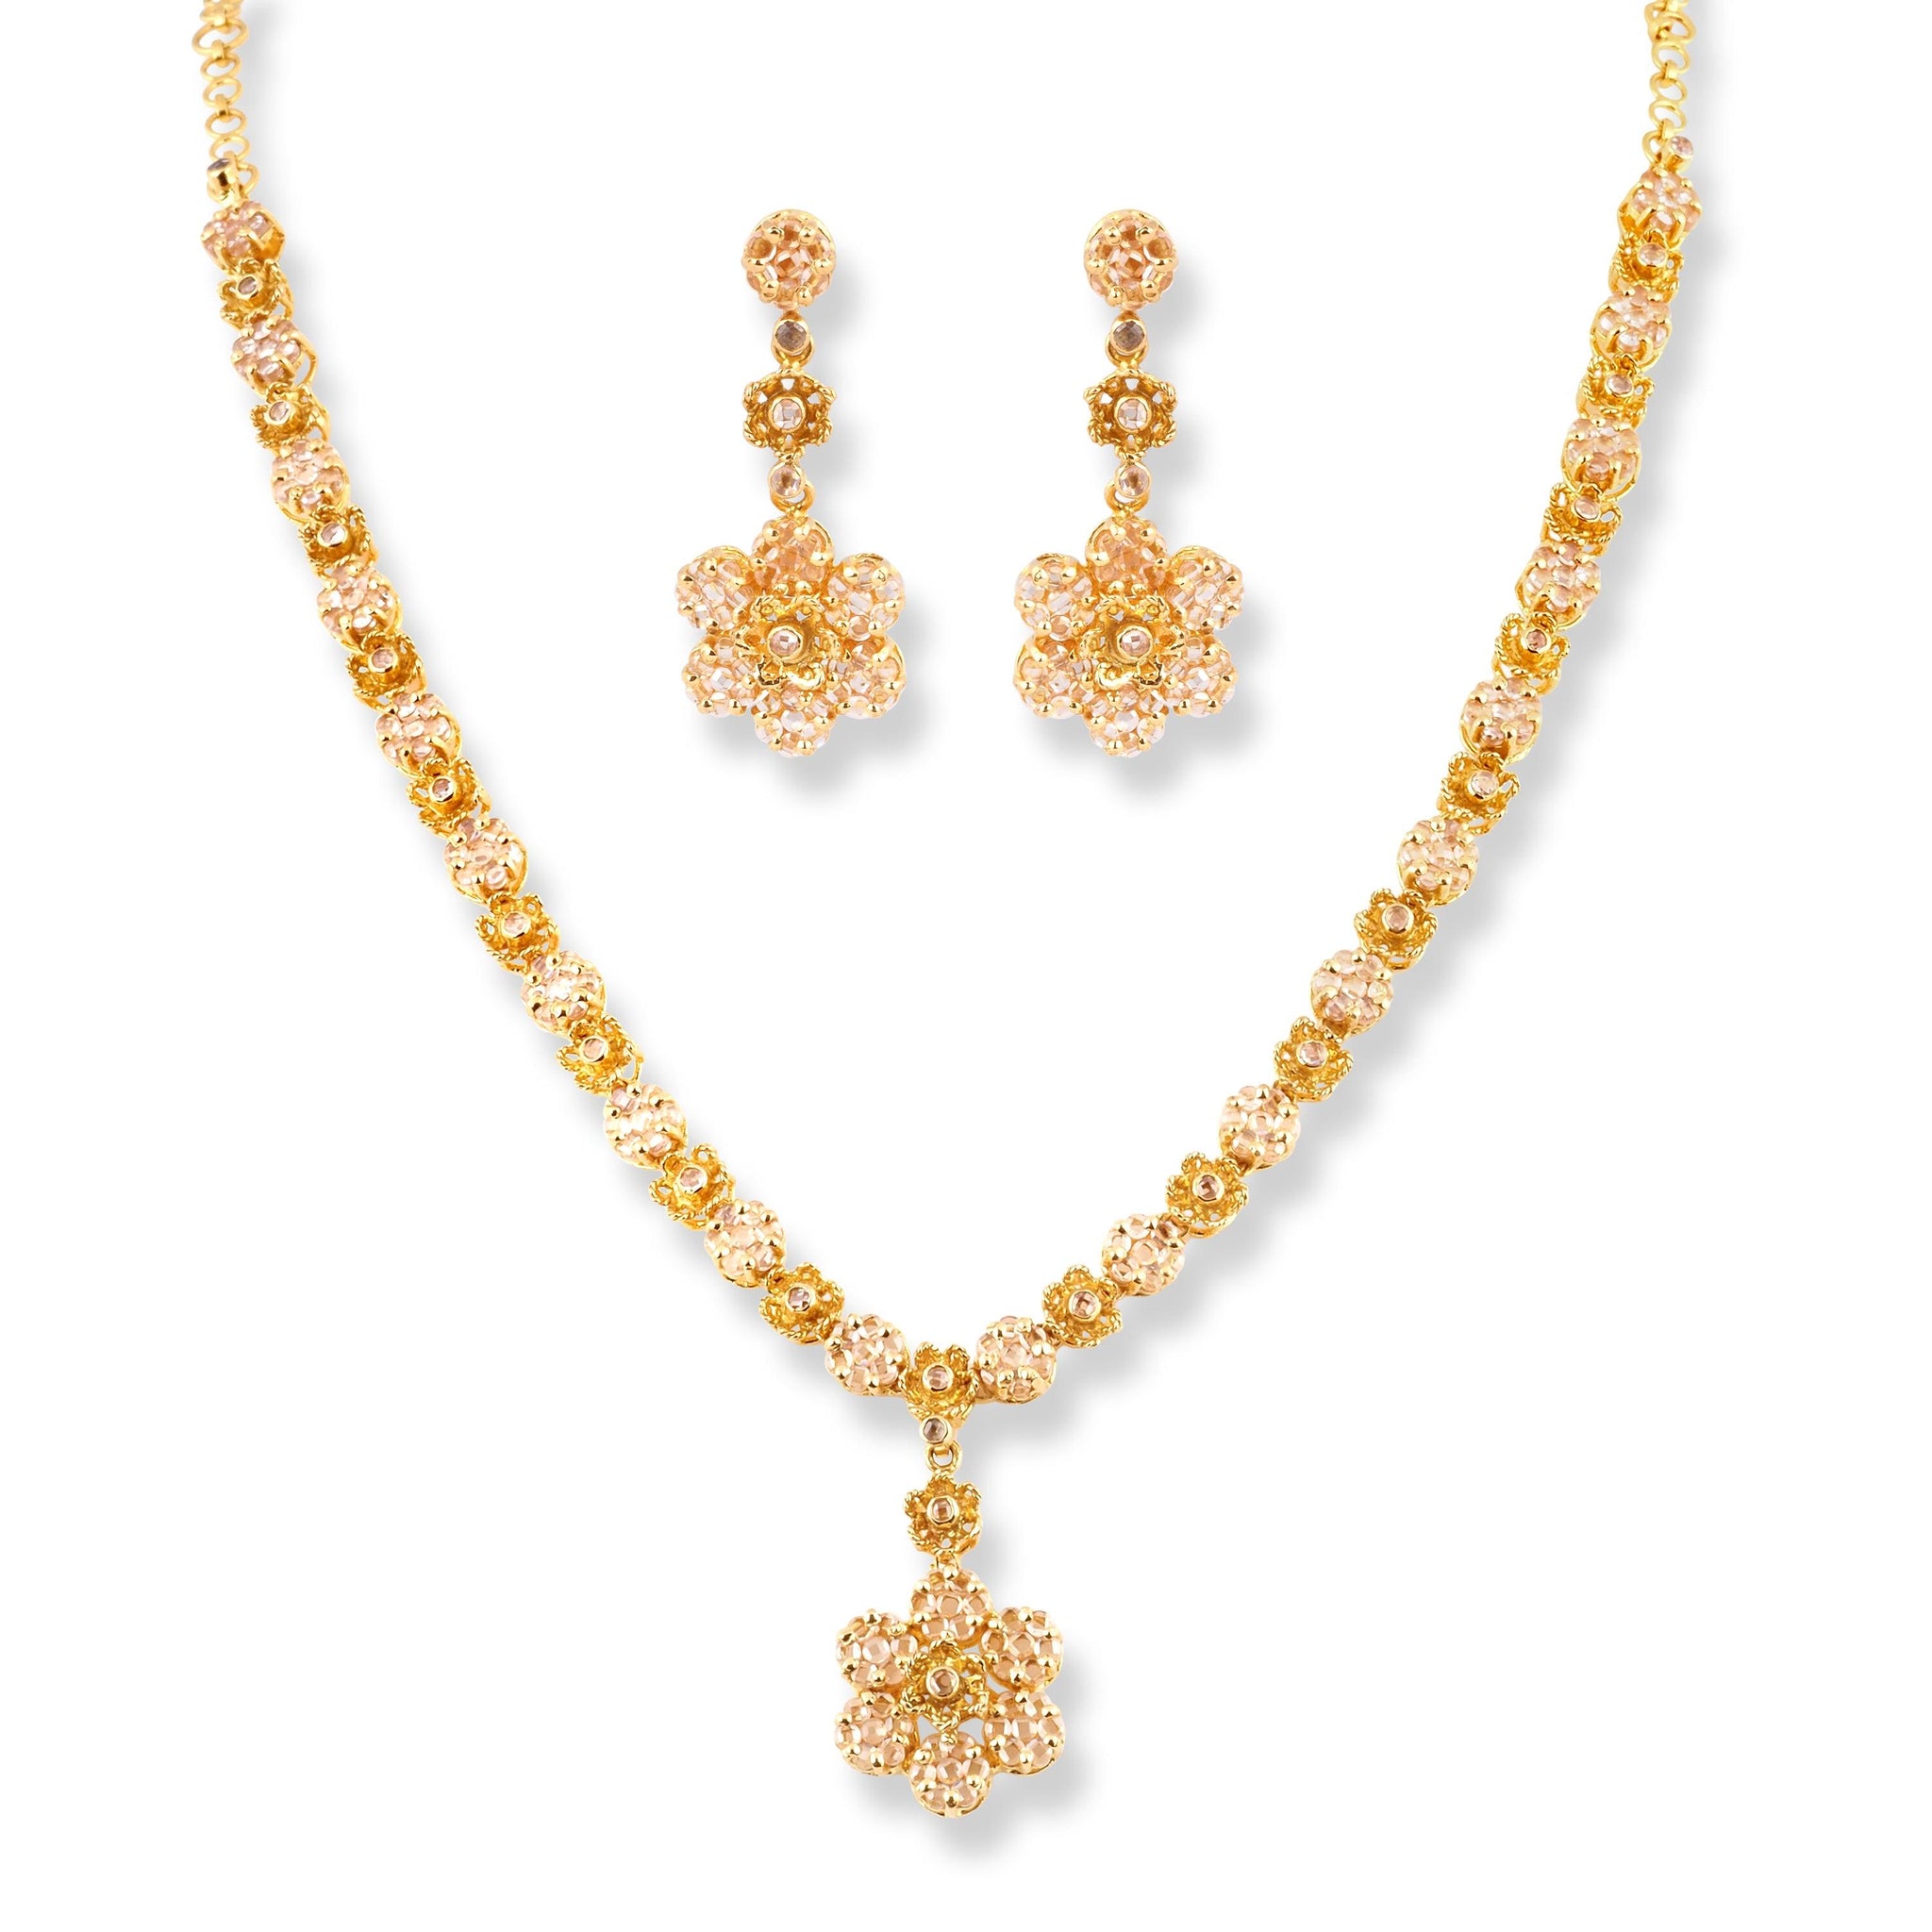 22ct Yellow Gold Necklace & Earrings with Polki Style Cubic Zirconias NE-7058